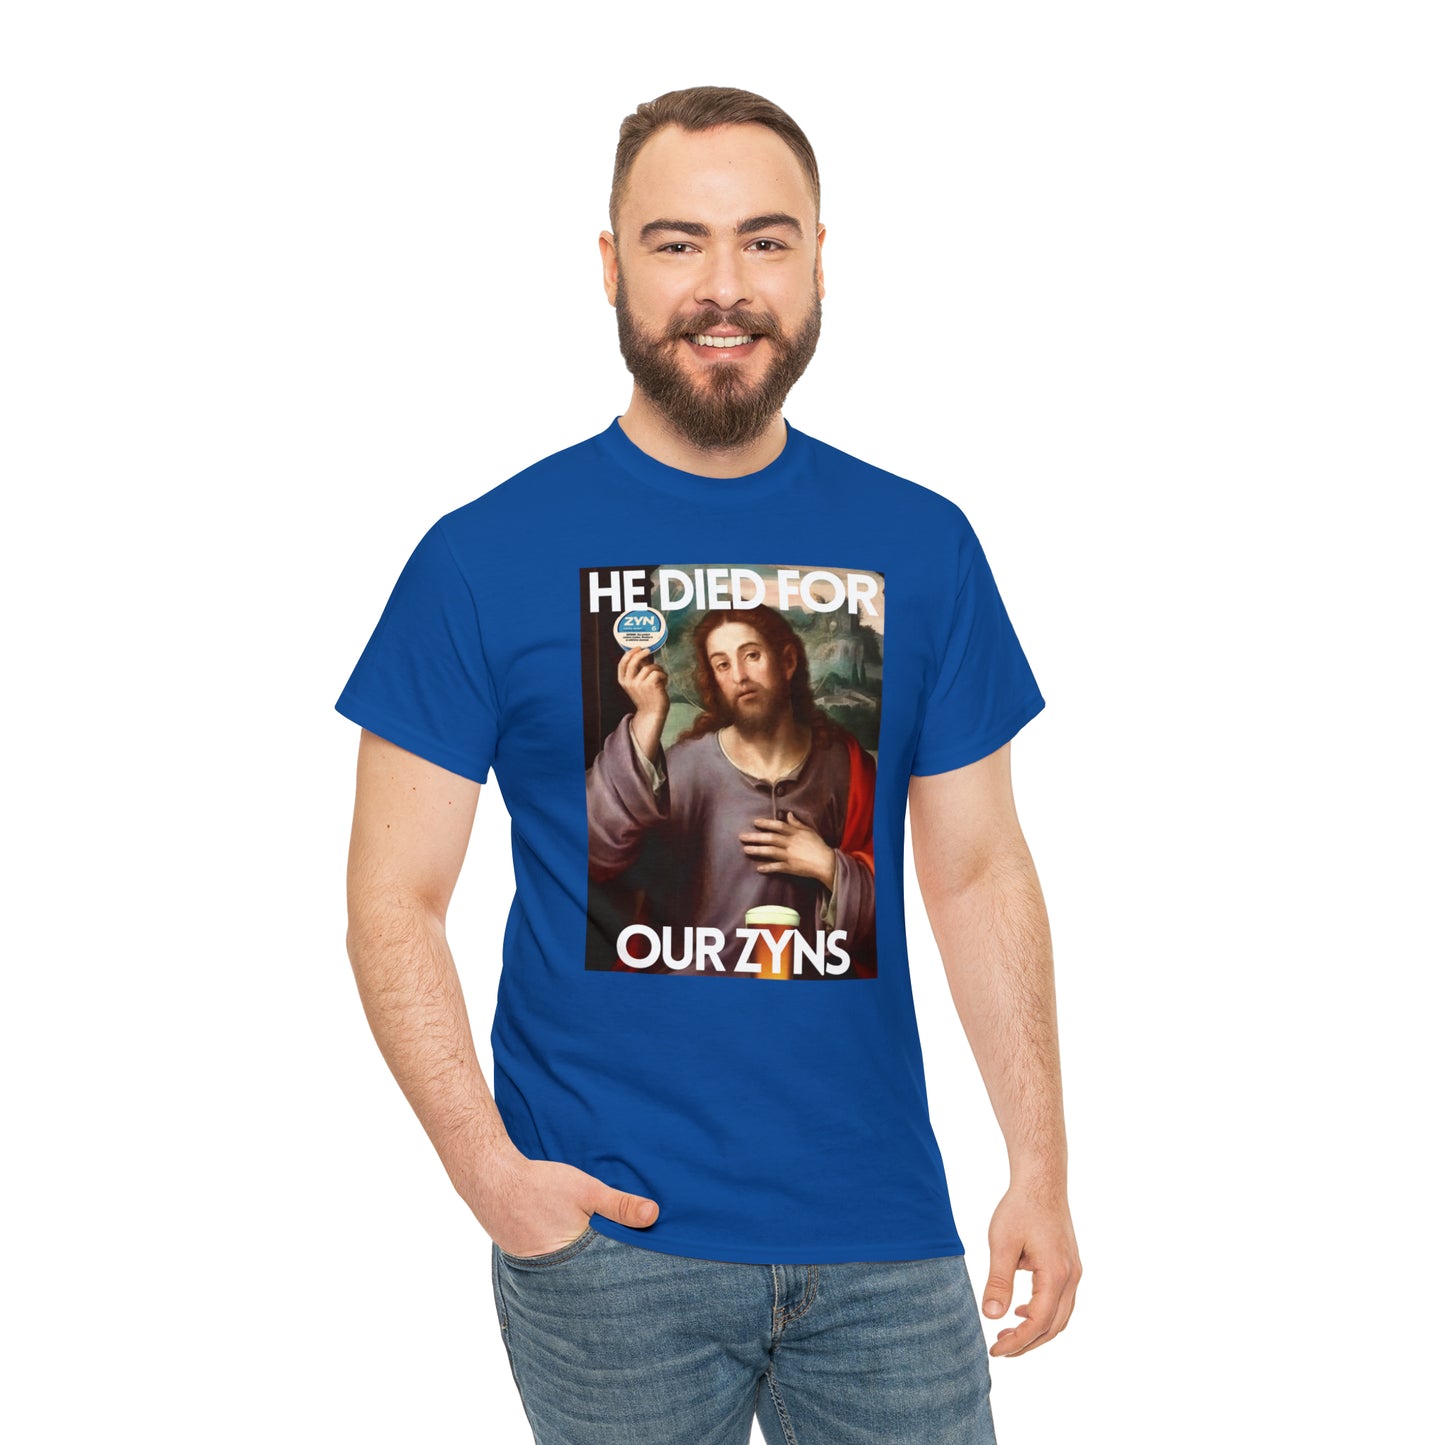 He died for our Zyns Jesus - Unisex Heavy Cotton Tee